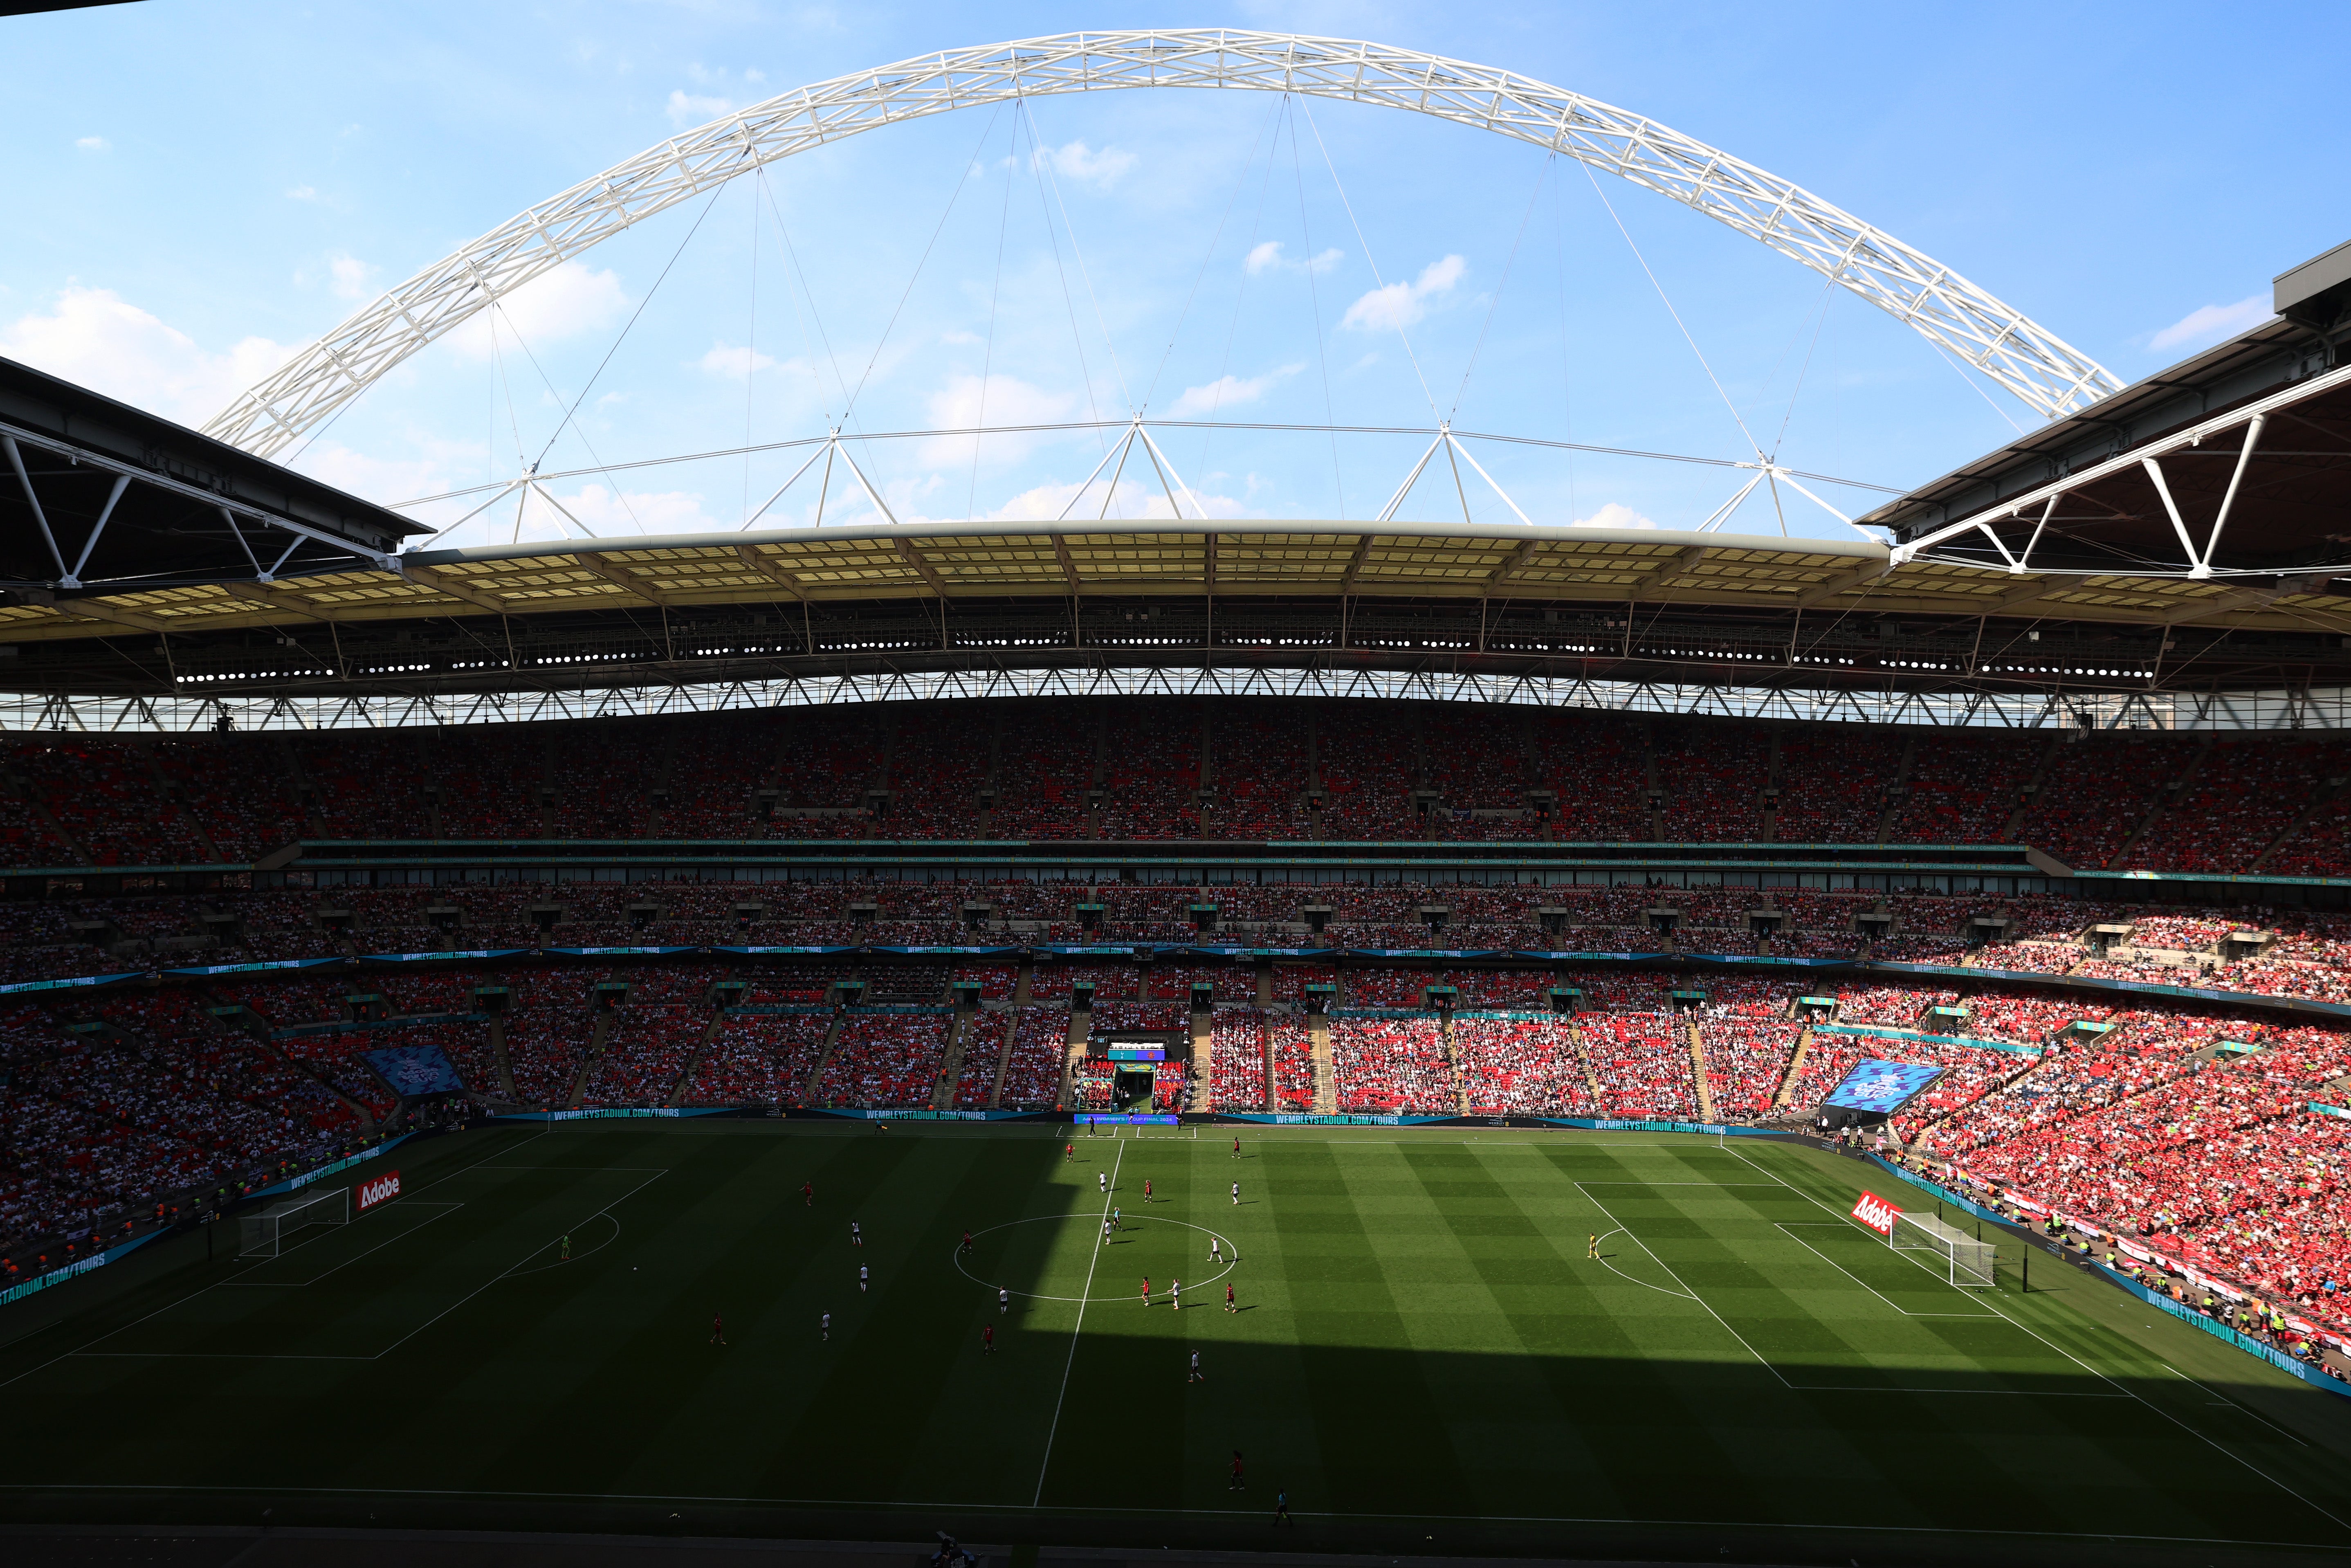 The Women’s FA Cup final was held at Wembley